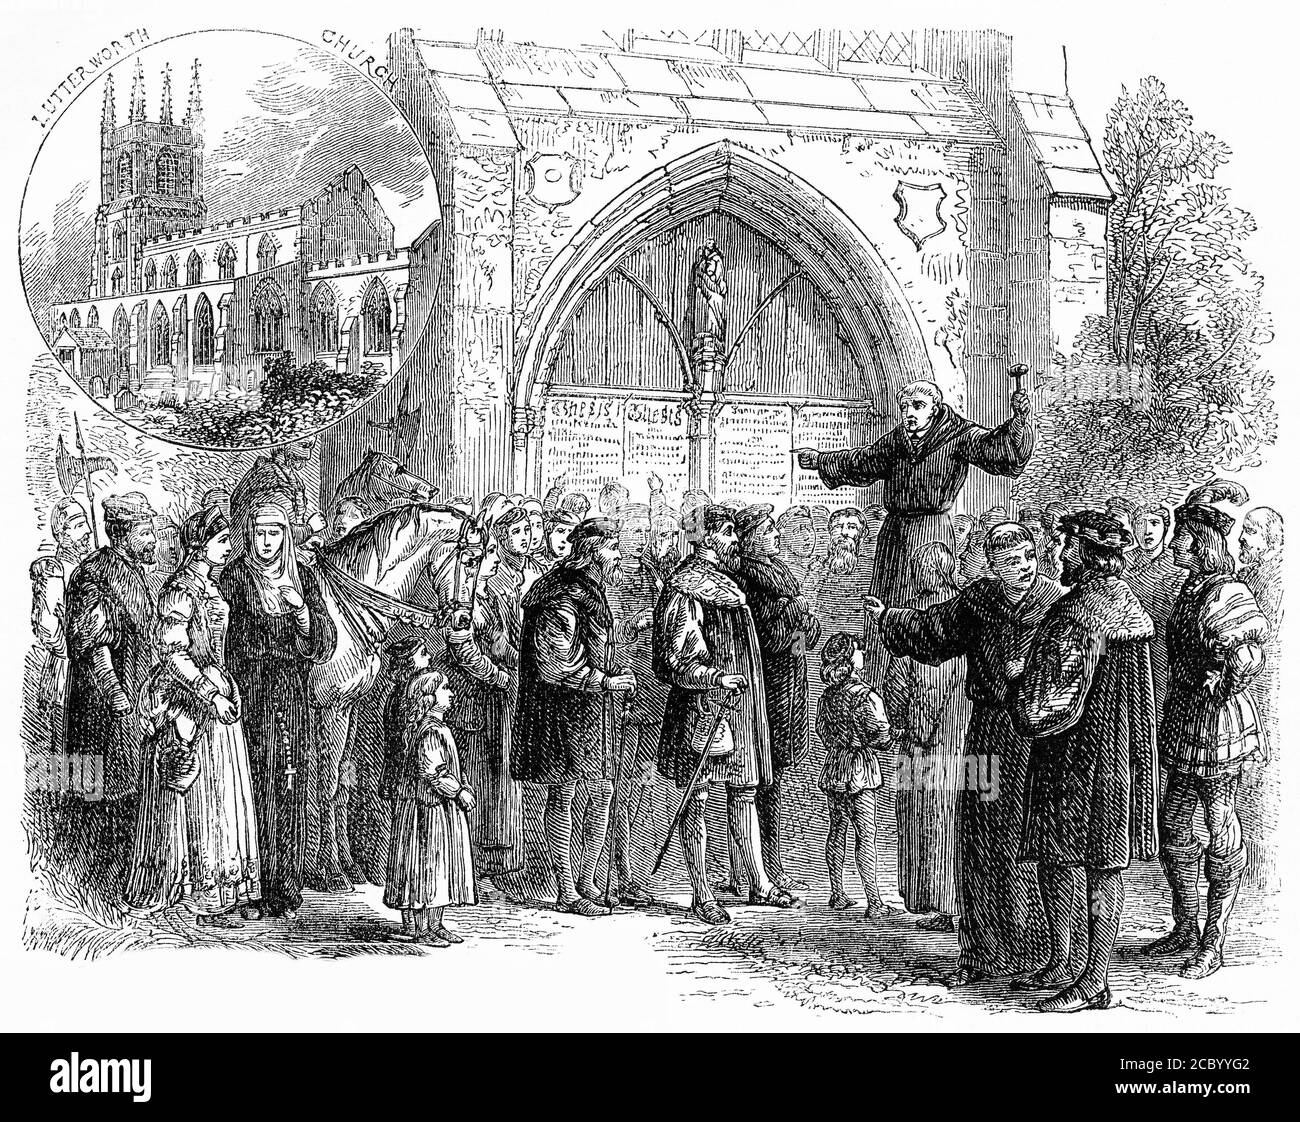 Engraving of two scenes from the Protestant Reformation - Lutterworth Church in England, the parish of John Wycliffe, and John Tetzel selling indulgenses in Germany Stock Photo